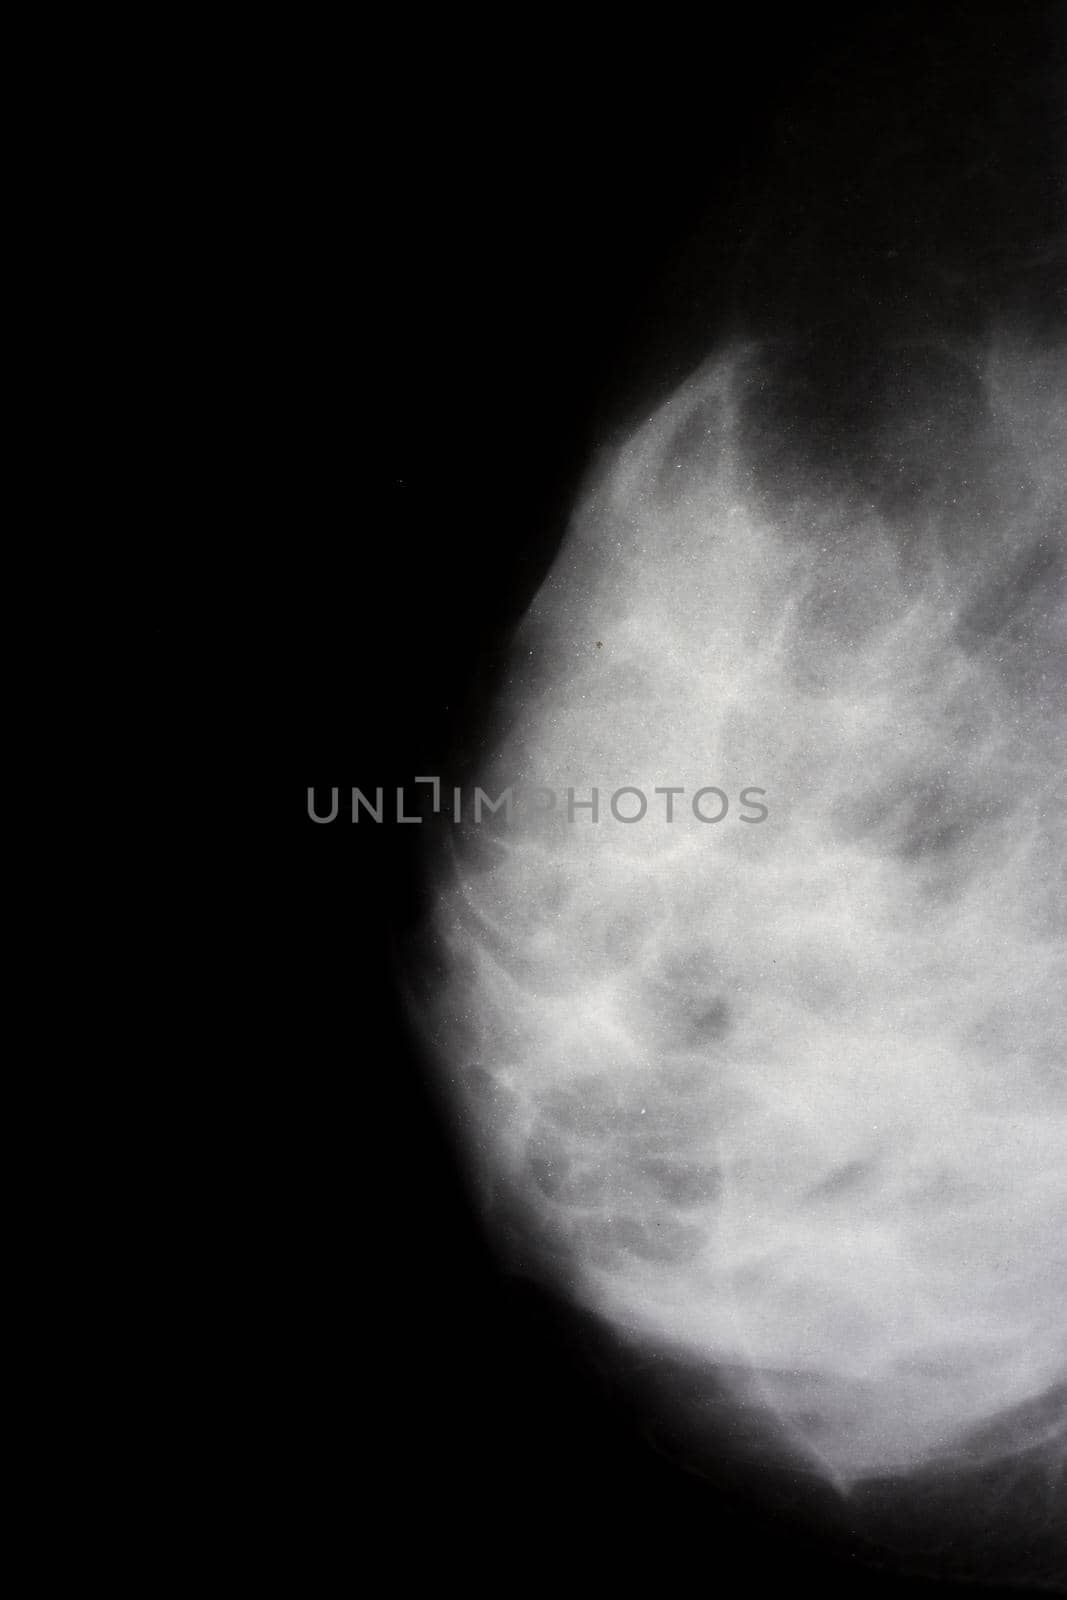 woman right breast xray closeup, vertical composition